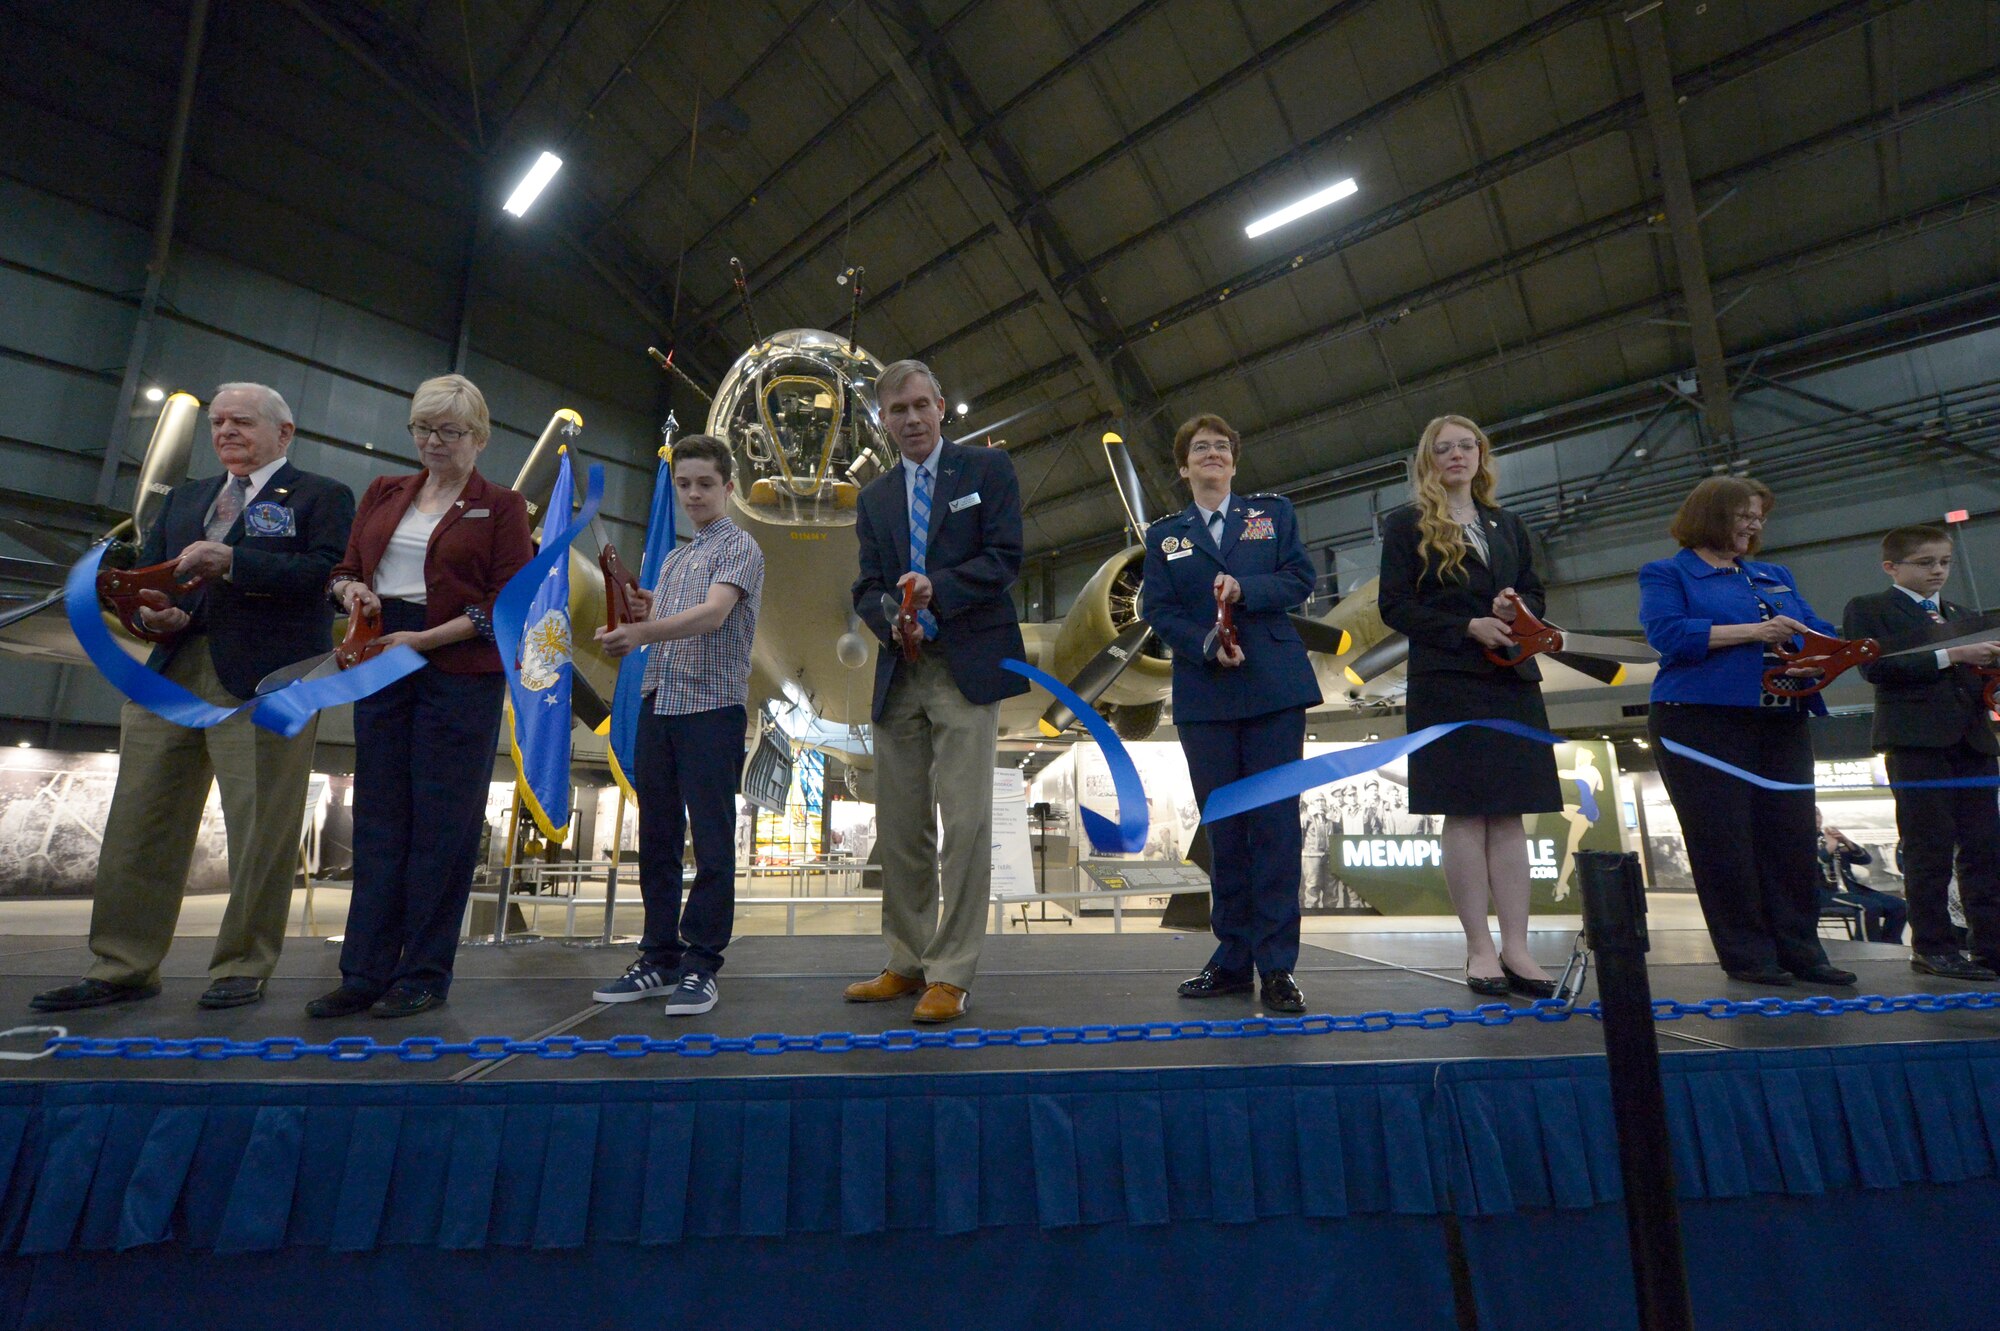 Special guests including National Museum of the U.S. Air Force Director retired Lt. Gen. John L. Hudson and Air Force Director of Staff Lt. Gen. Jacqueline D. Van Ovost cut the ceremonial ribbon for the public opening of the Memphis Belle at the National Museum of the U.S. Air Force, Ohio, May 17, 2018. The Memphis Belle crew completed their 25th mission in Europe exactly 75 years before the ribbon cutting ceremony. (U.S. Air Force photo by Staff Sgt. Megan Friedl)